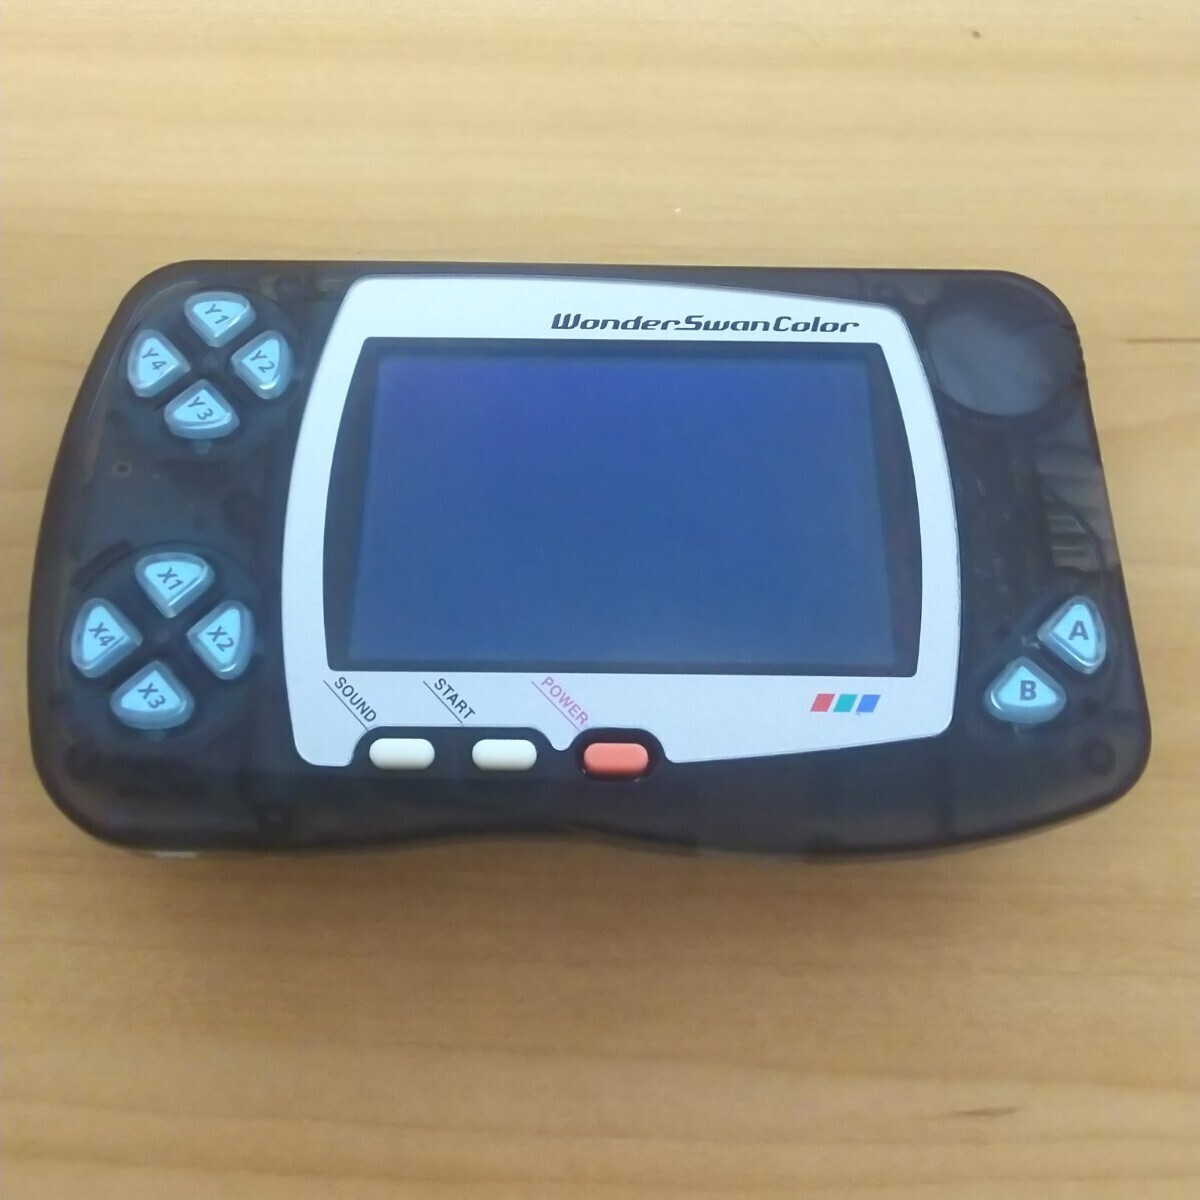  Bandai WonderSwan Color Clear Black Early Prototype Console